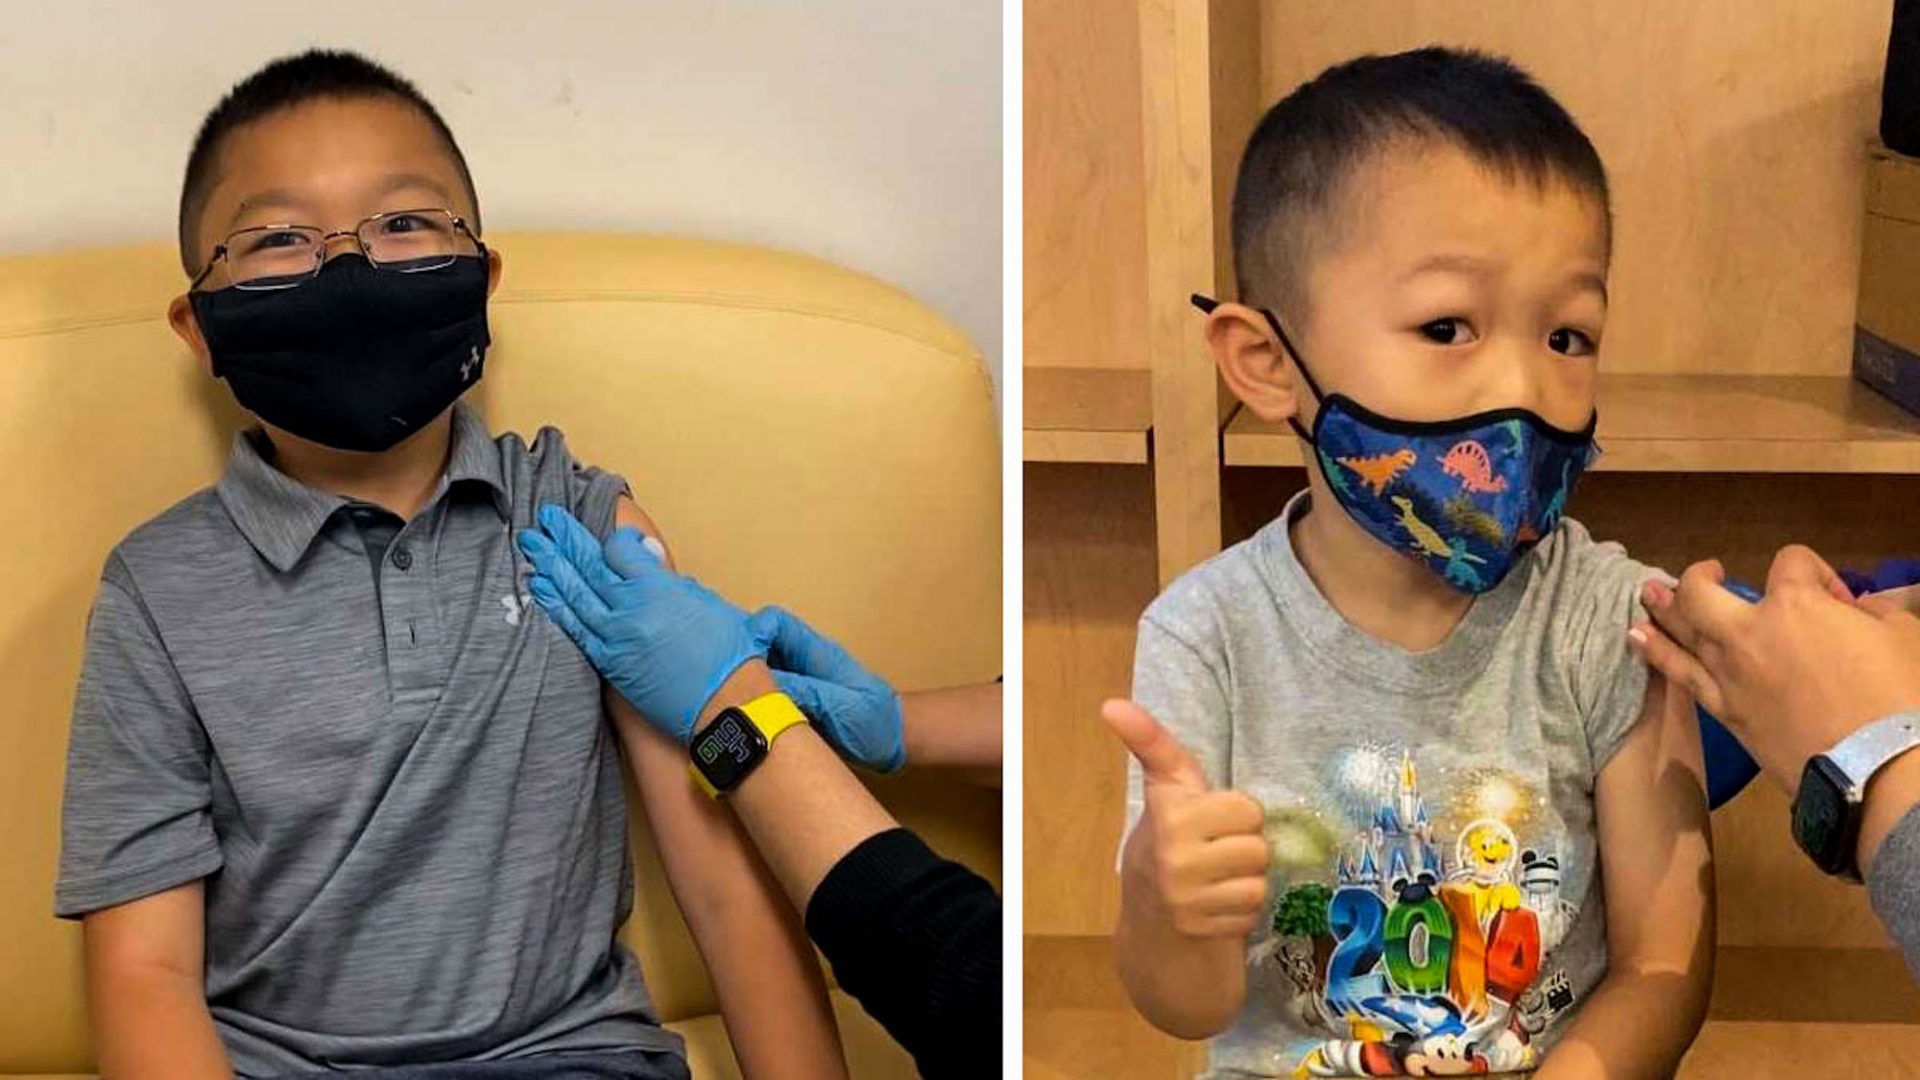 Collage of two photos shows young boys, wearing masks, receiving vaccinations.